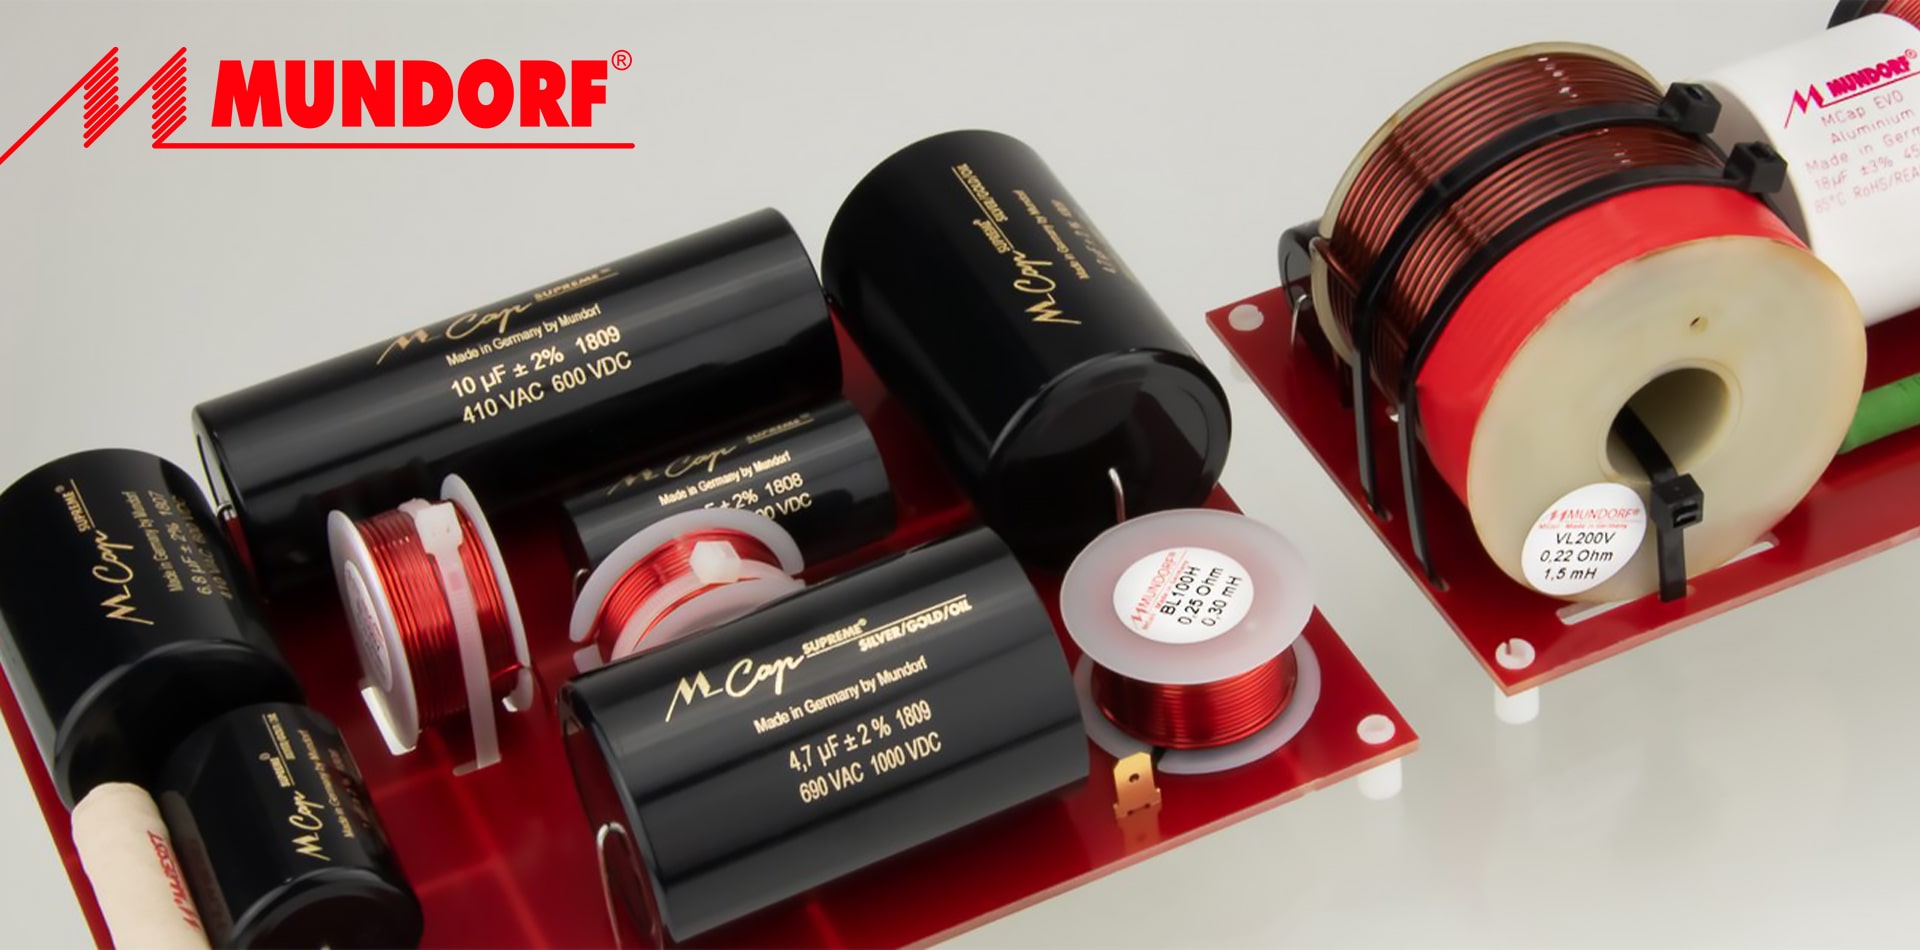 Mundorf. German-made electronic components